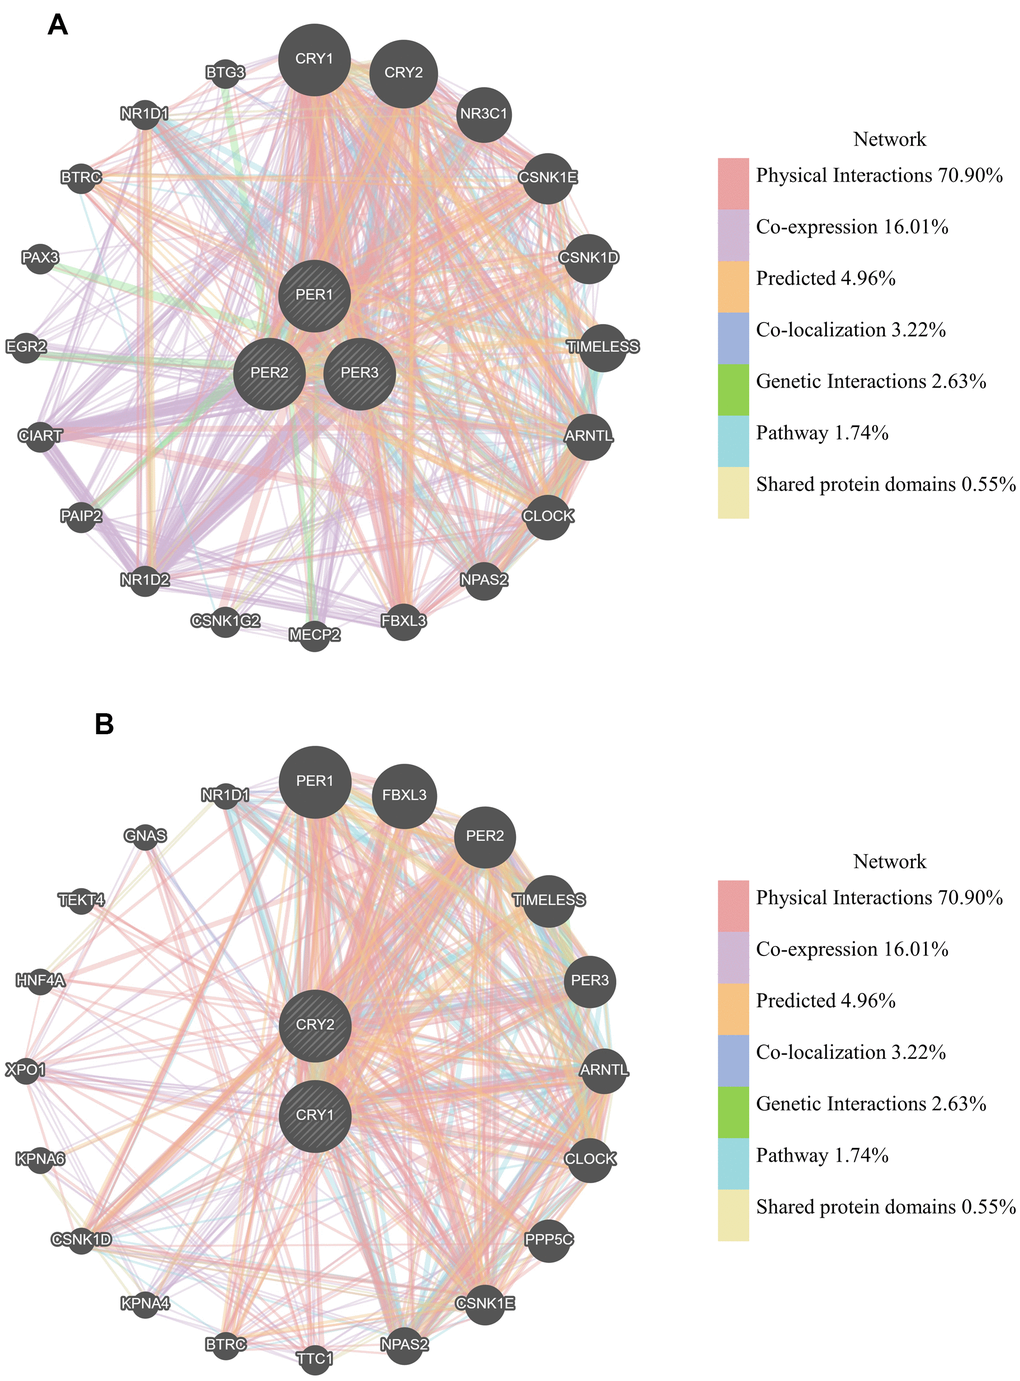 Gene interactions among PER1, PER2, PER3, CRY1, and CRY2 in lung adenocarcinoma (LUAD) patients (GeneMANIA). (A) PER (period) family network constructed by GeneMANIA. (B) CRY (cryptochrome) family network constructed by GeneMANIA. Each node in the figure represents a gene, and the size of the node represents the intensity of the interaction. Connecting lines between nodes represent gene-gene interactions. The color of the connecting line represents the type of interaction.